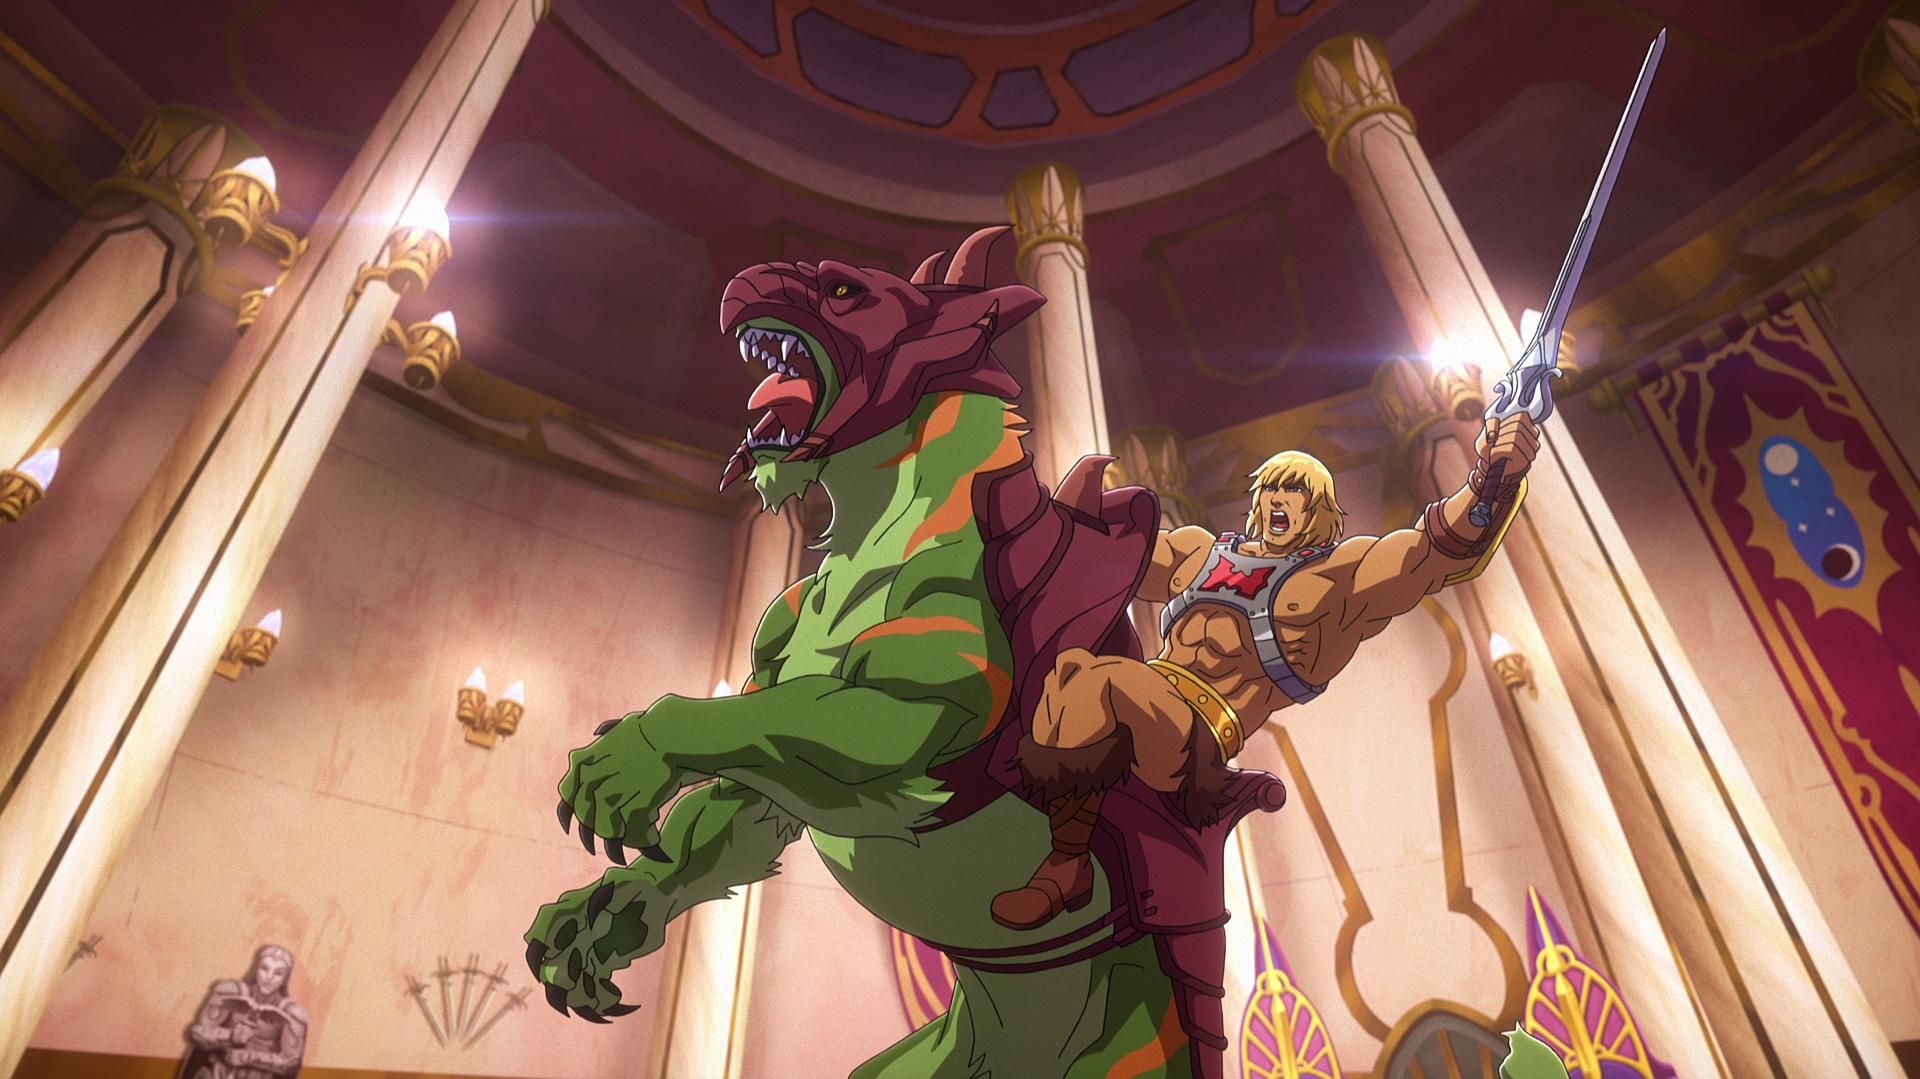 In a CG animated still from Masters of the Universe: Revelation, He-Man wears a silver chest plate with a red &quot;H&quot; in the center, a golden armored belt and golden wrist plates. He raises his silver sword atop Battle Cat, a green tiger with orange stripes and maroon armor on his hind legs. The two are in the center of a throne room.